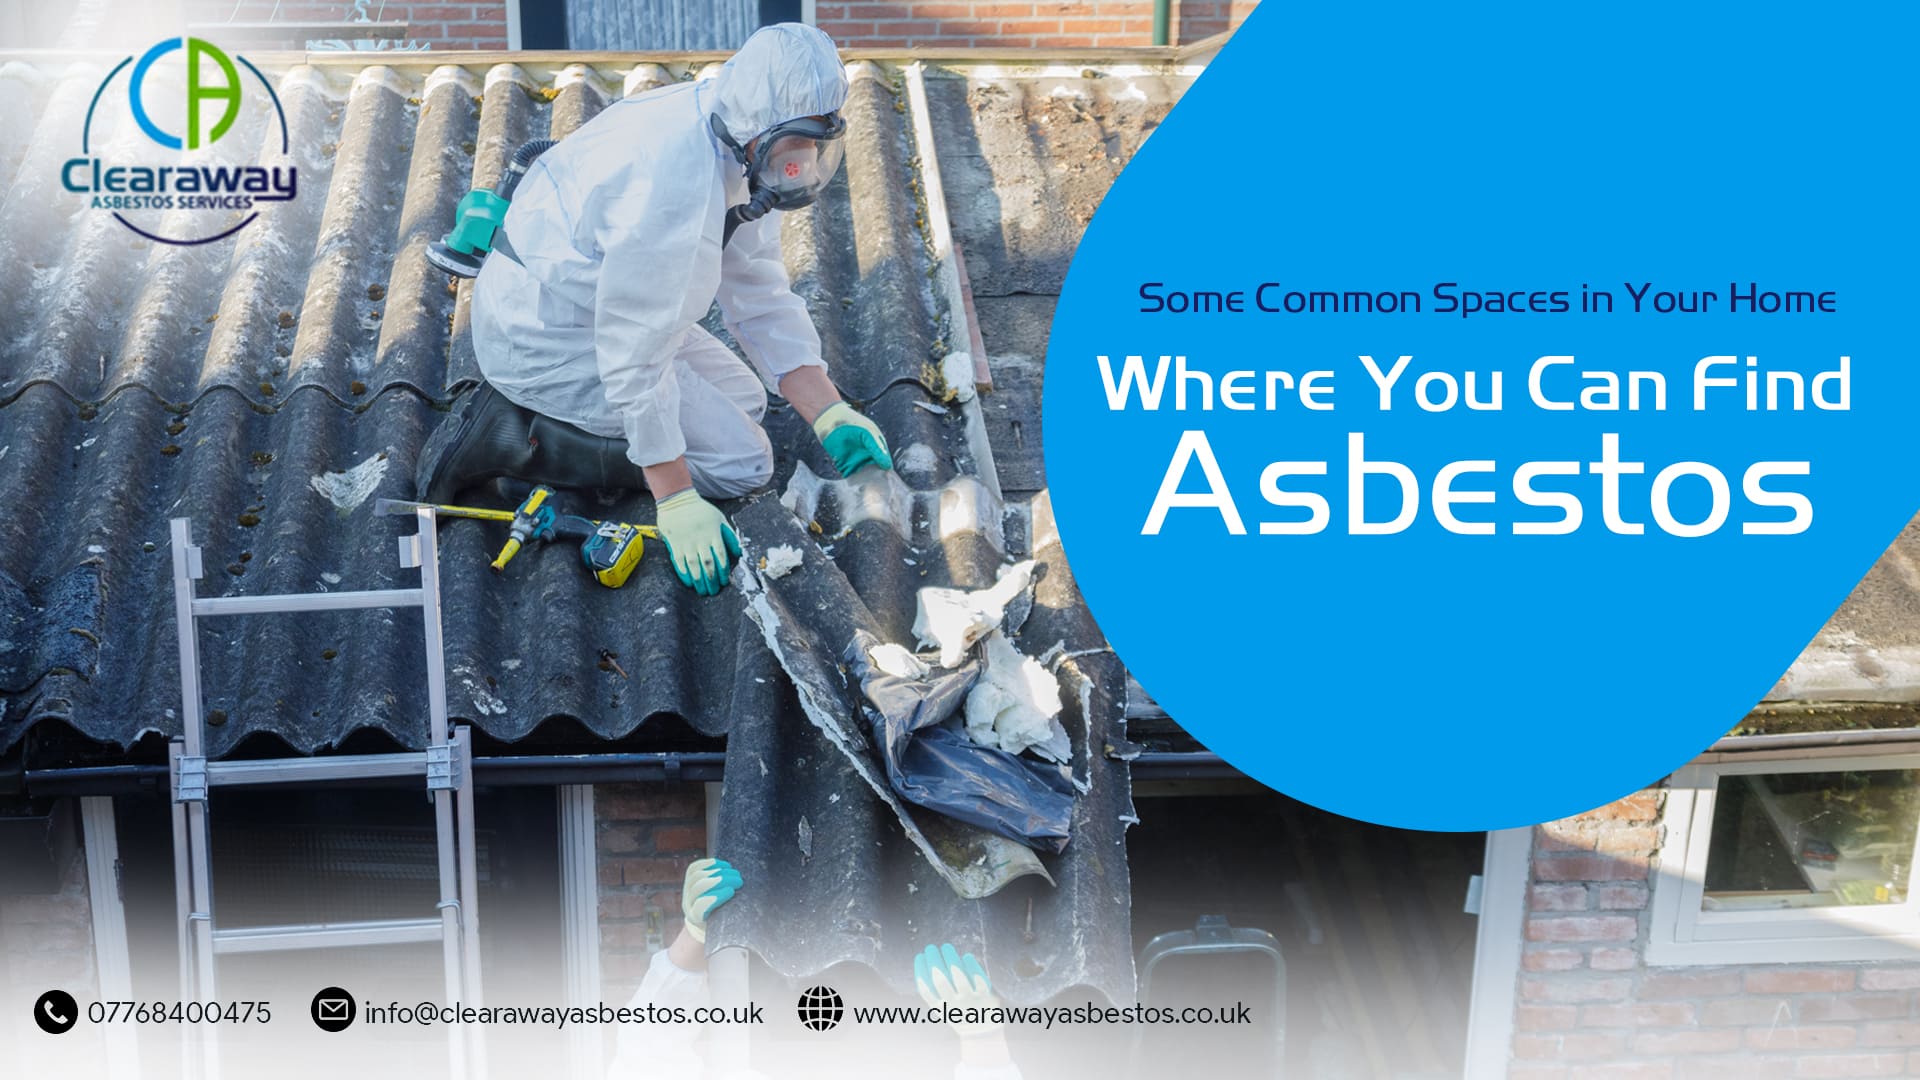 Some Common Spaces in Your Home Where You Can Find Asbestos